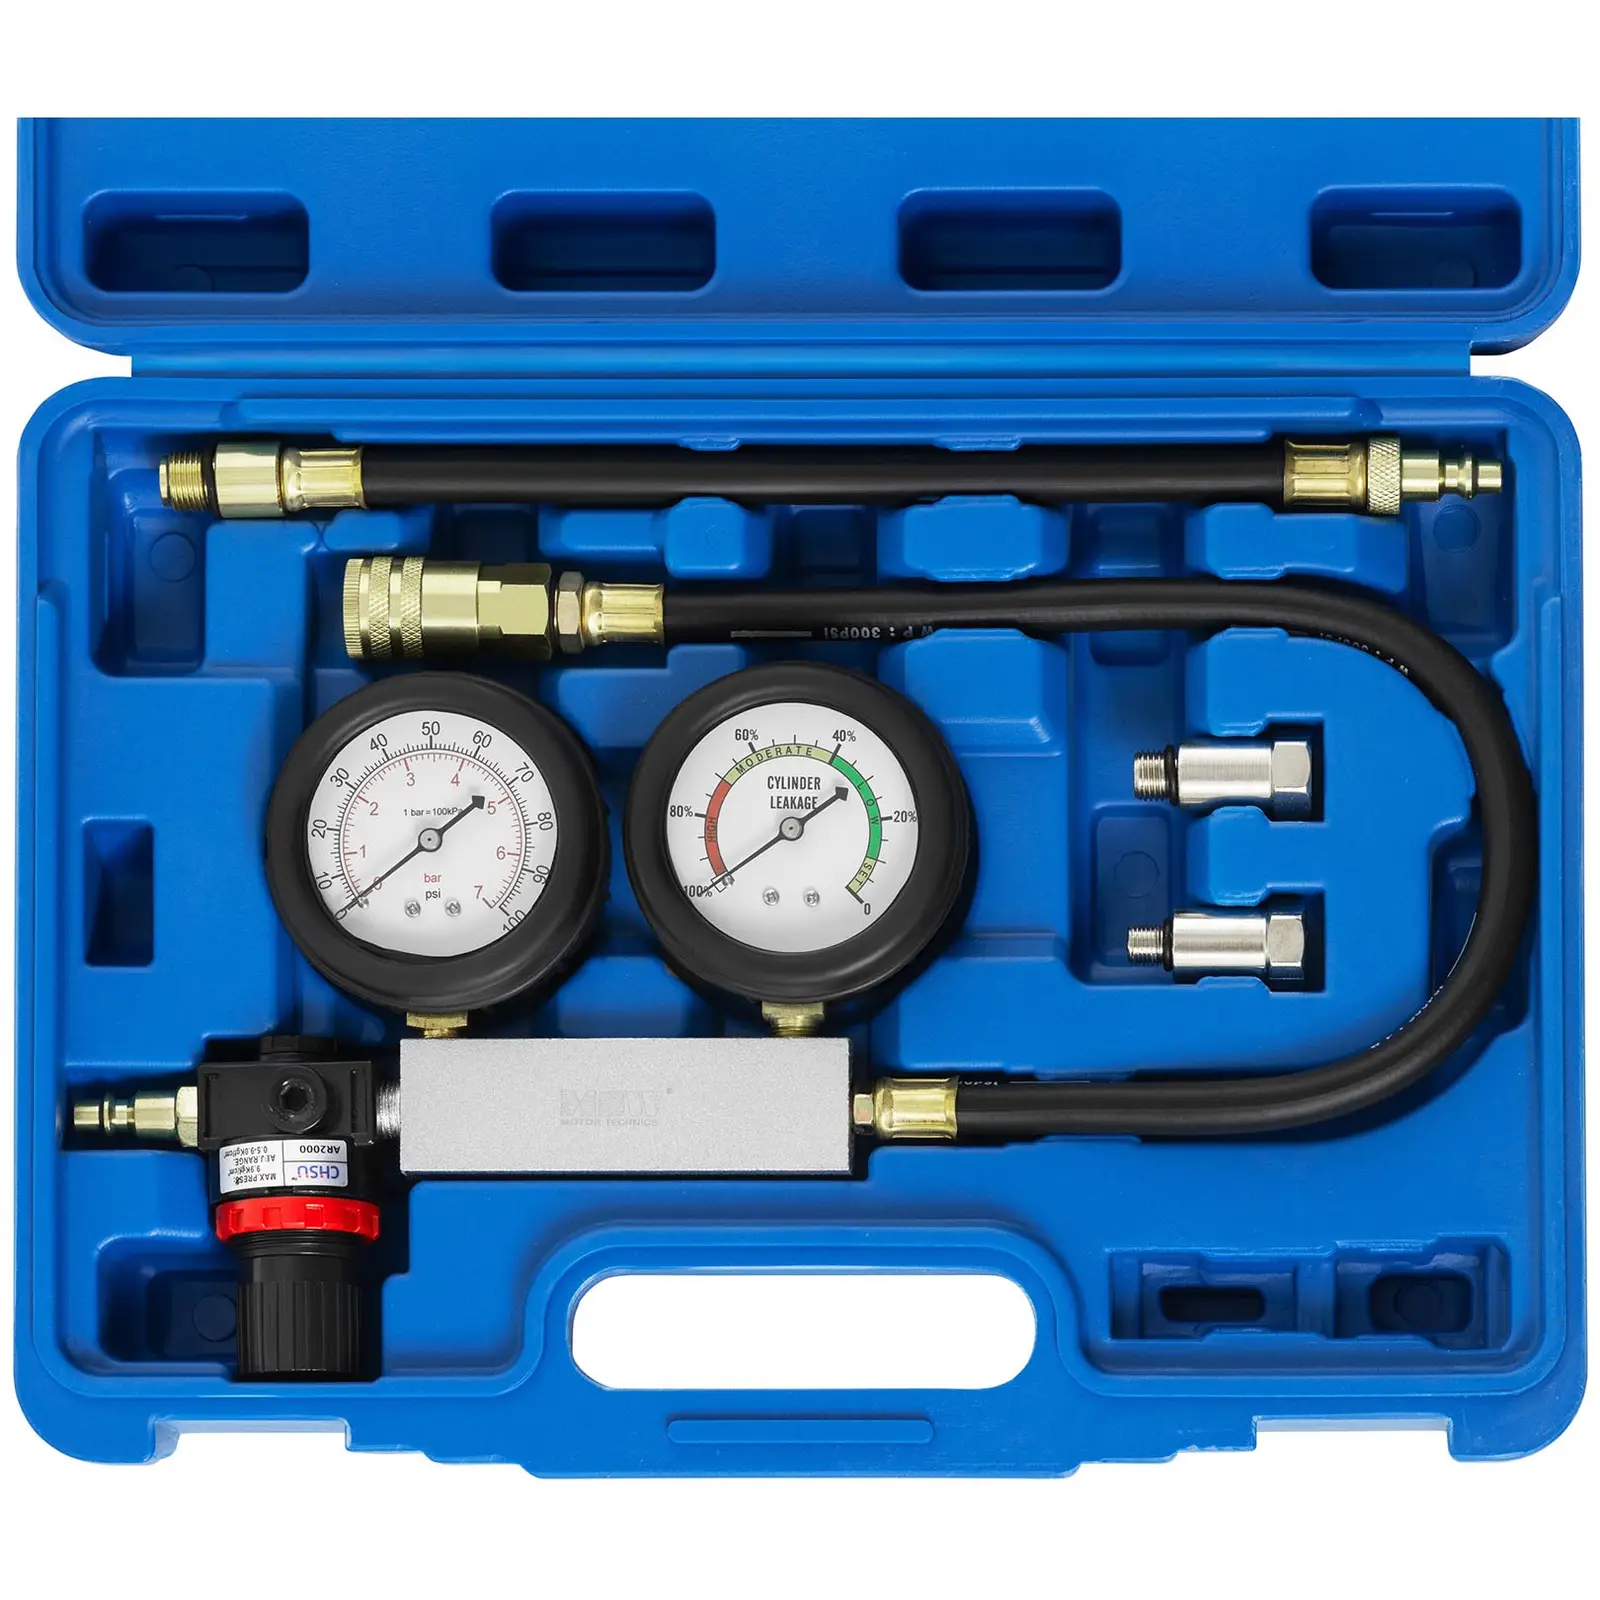 Compression Tester - double manometer - 0 - 7 bar